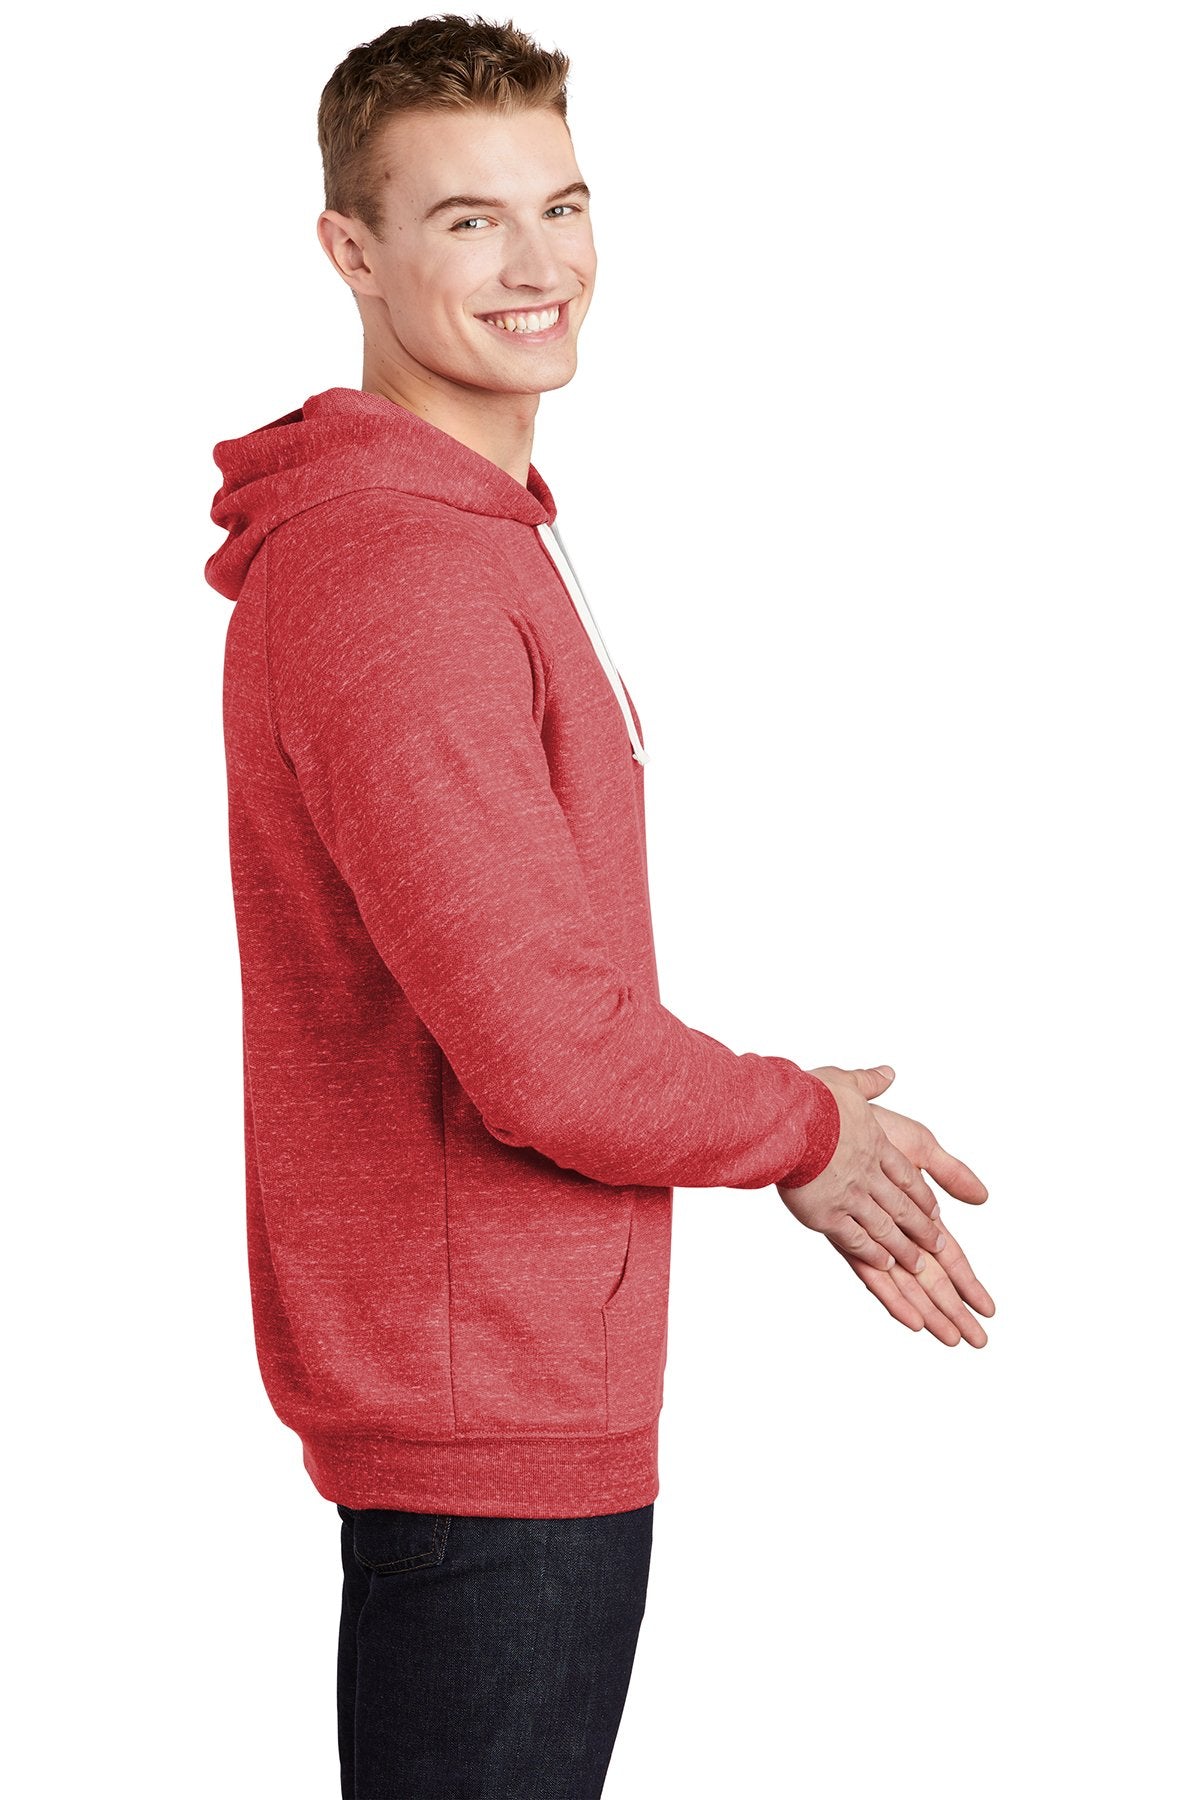 Jerzees Snow Heather French Terry Raglan Hoodie 90M Red